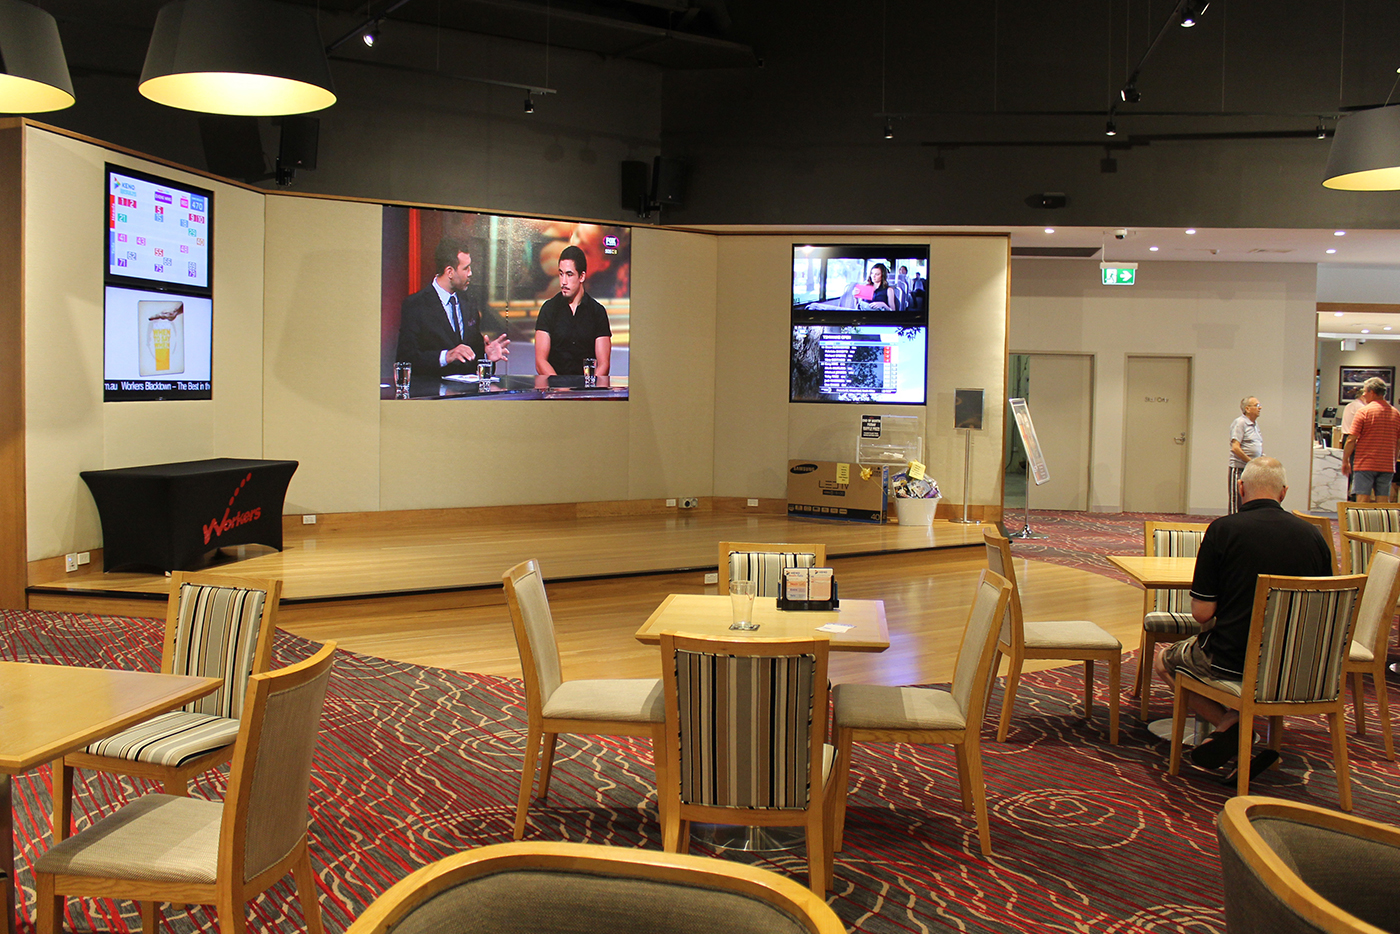 Blacktown Workers Club LED Screens and Video Wall